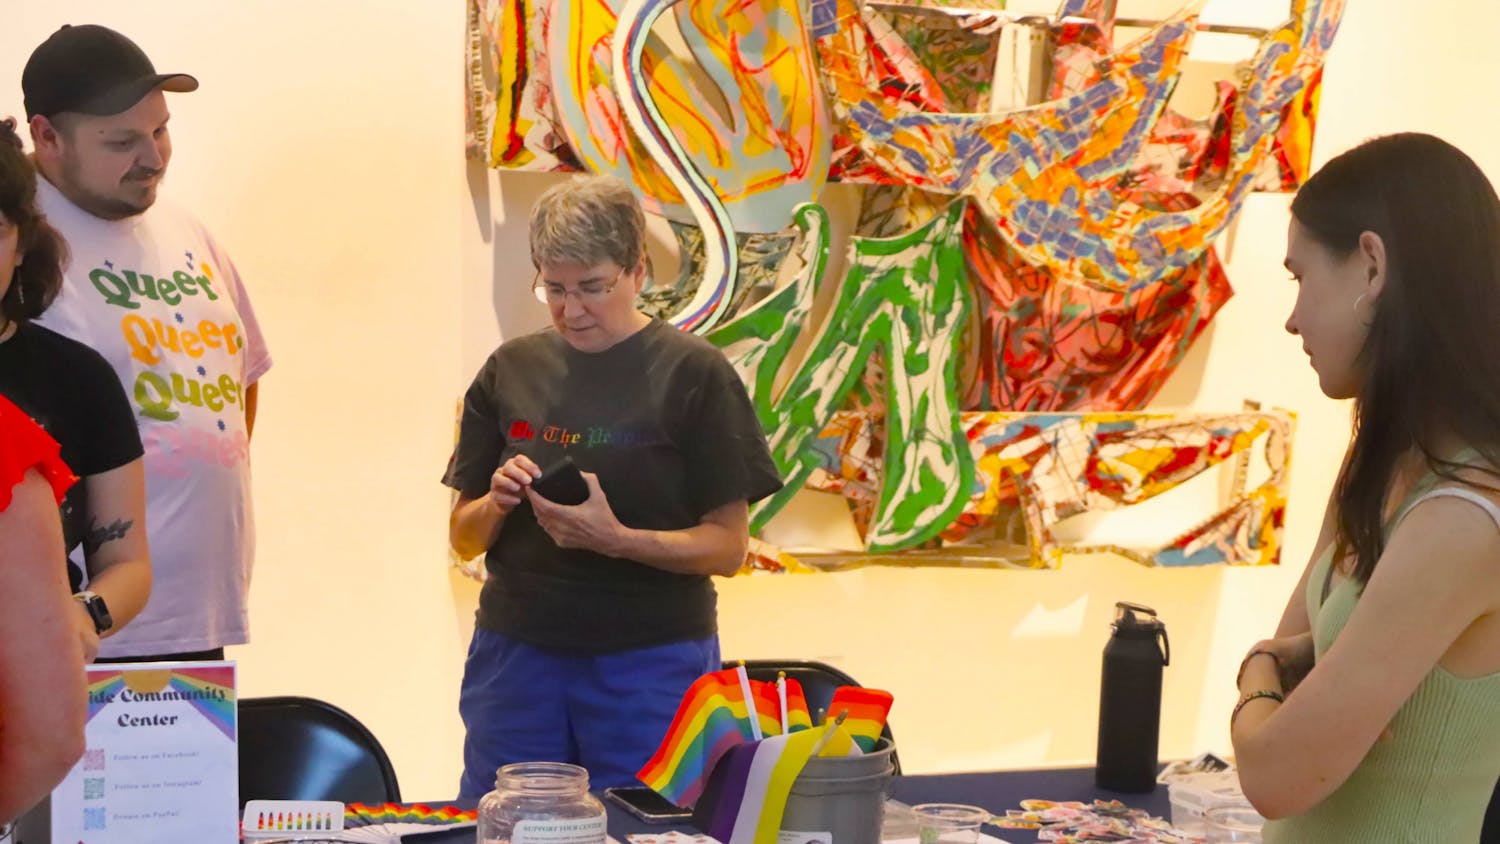 The Pride Community Center of North Central Florida tabled at the Museum Night offering Pride flags among other items on Thursday, June 8, 2023.